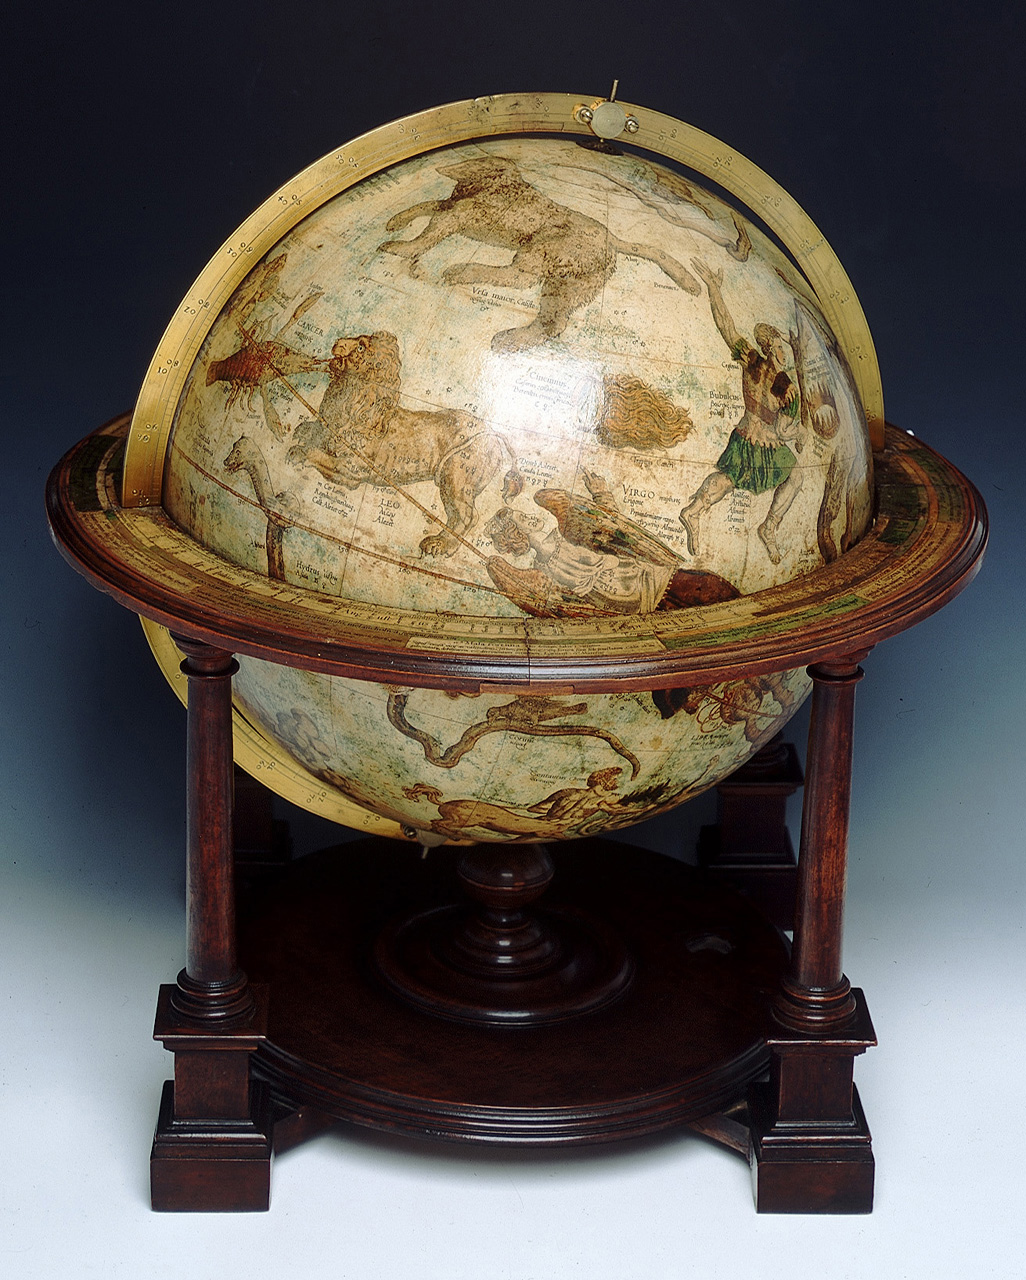 17. Terrestrial and celestial globes by Gerard Mercator, 1541, 1551